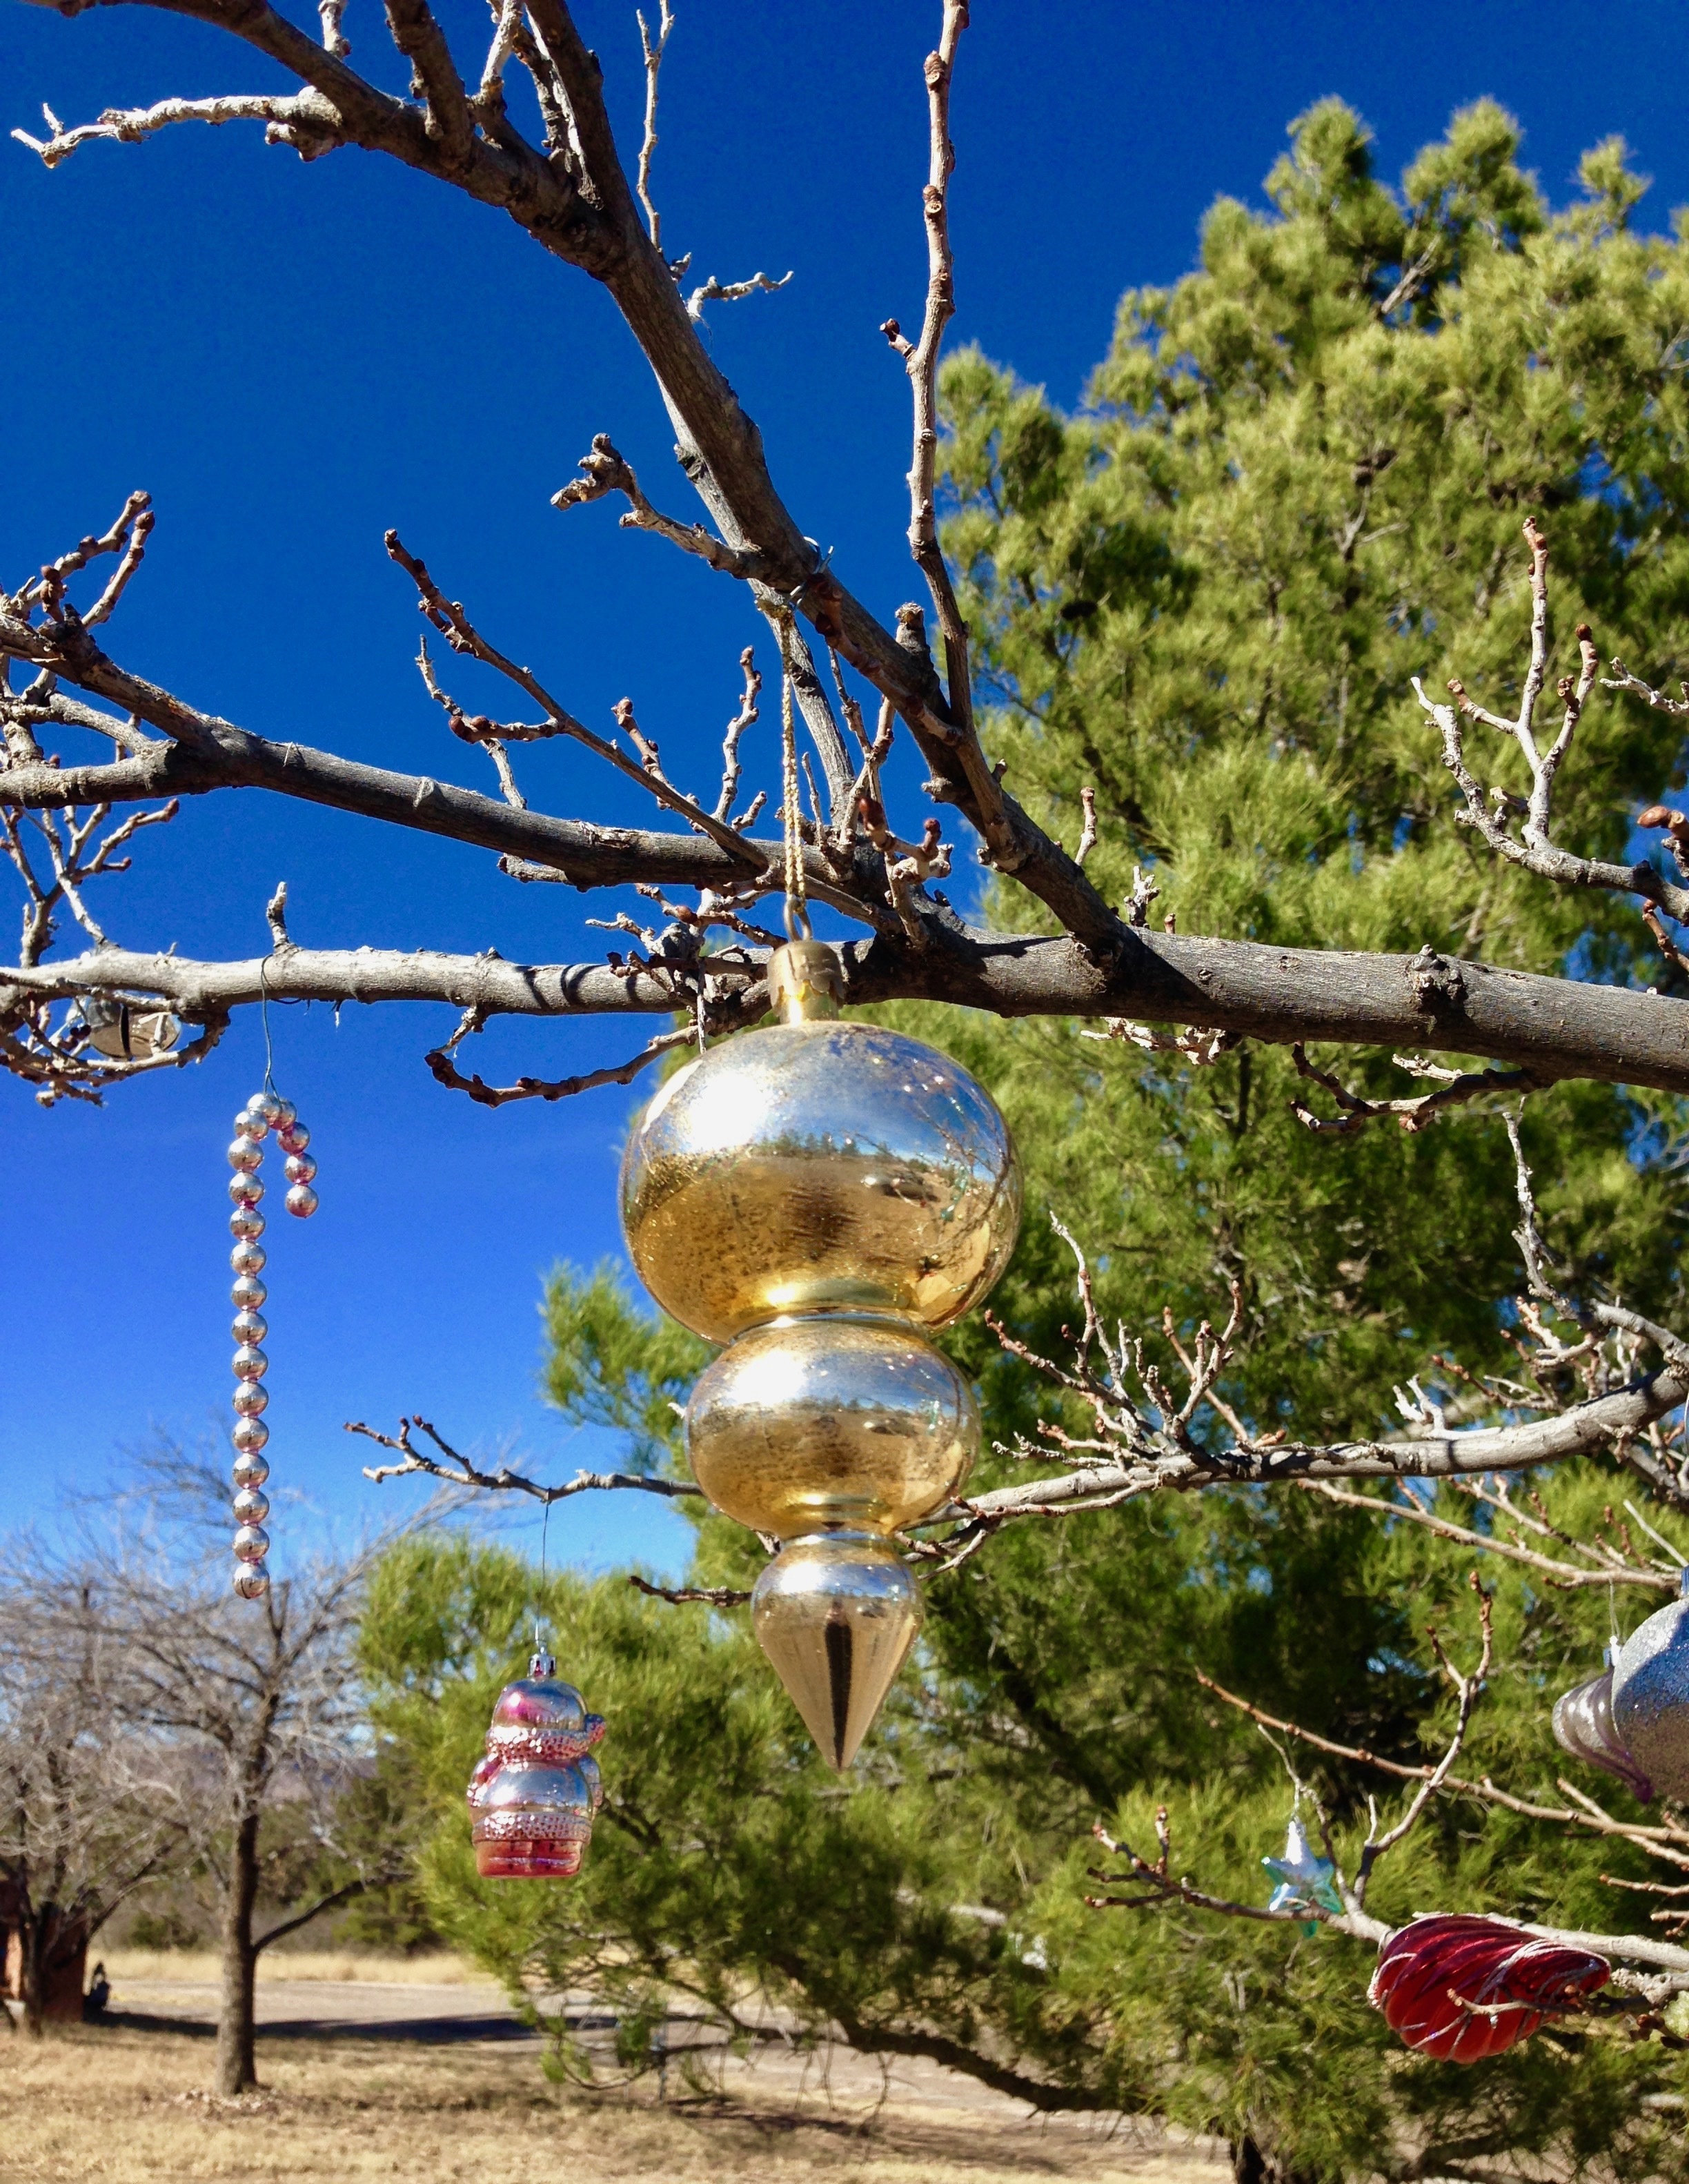 Ornament hung from an outdoor tree